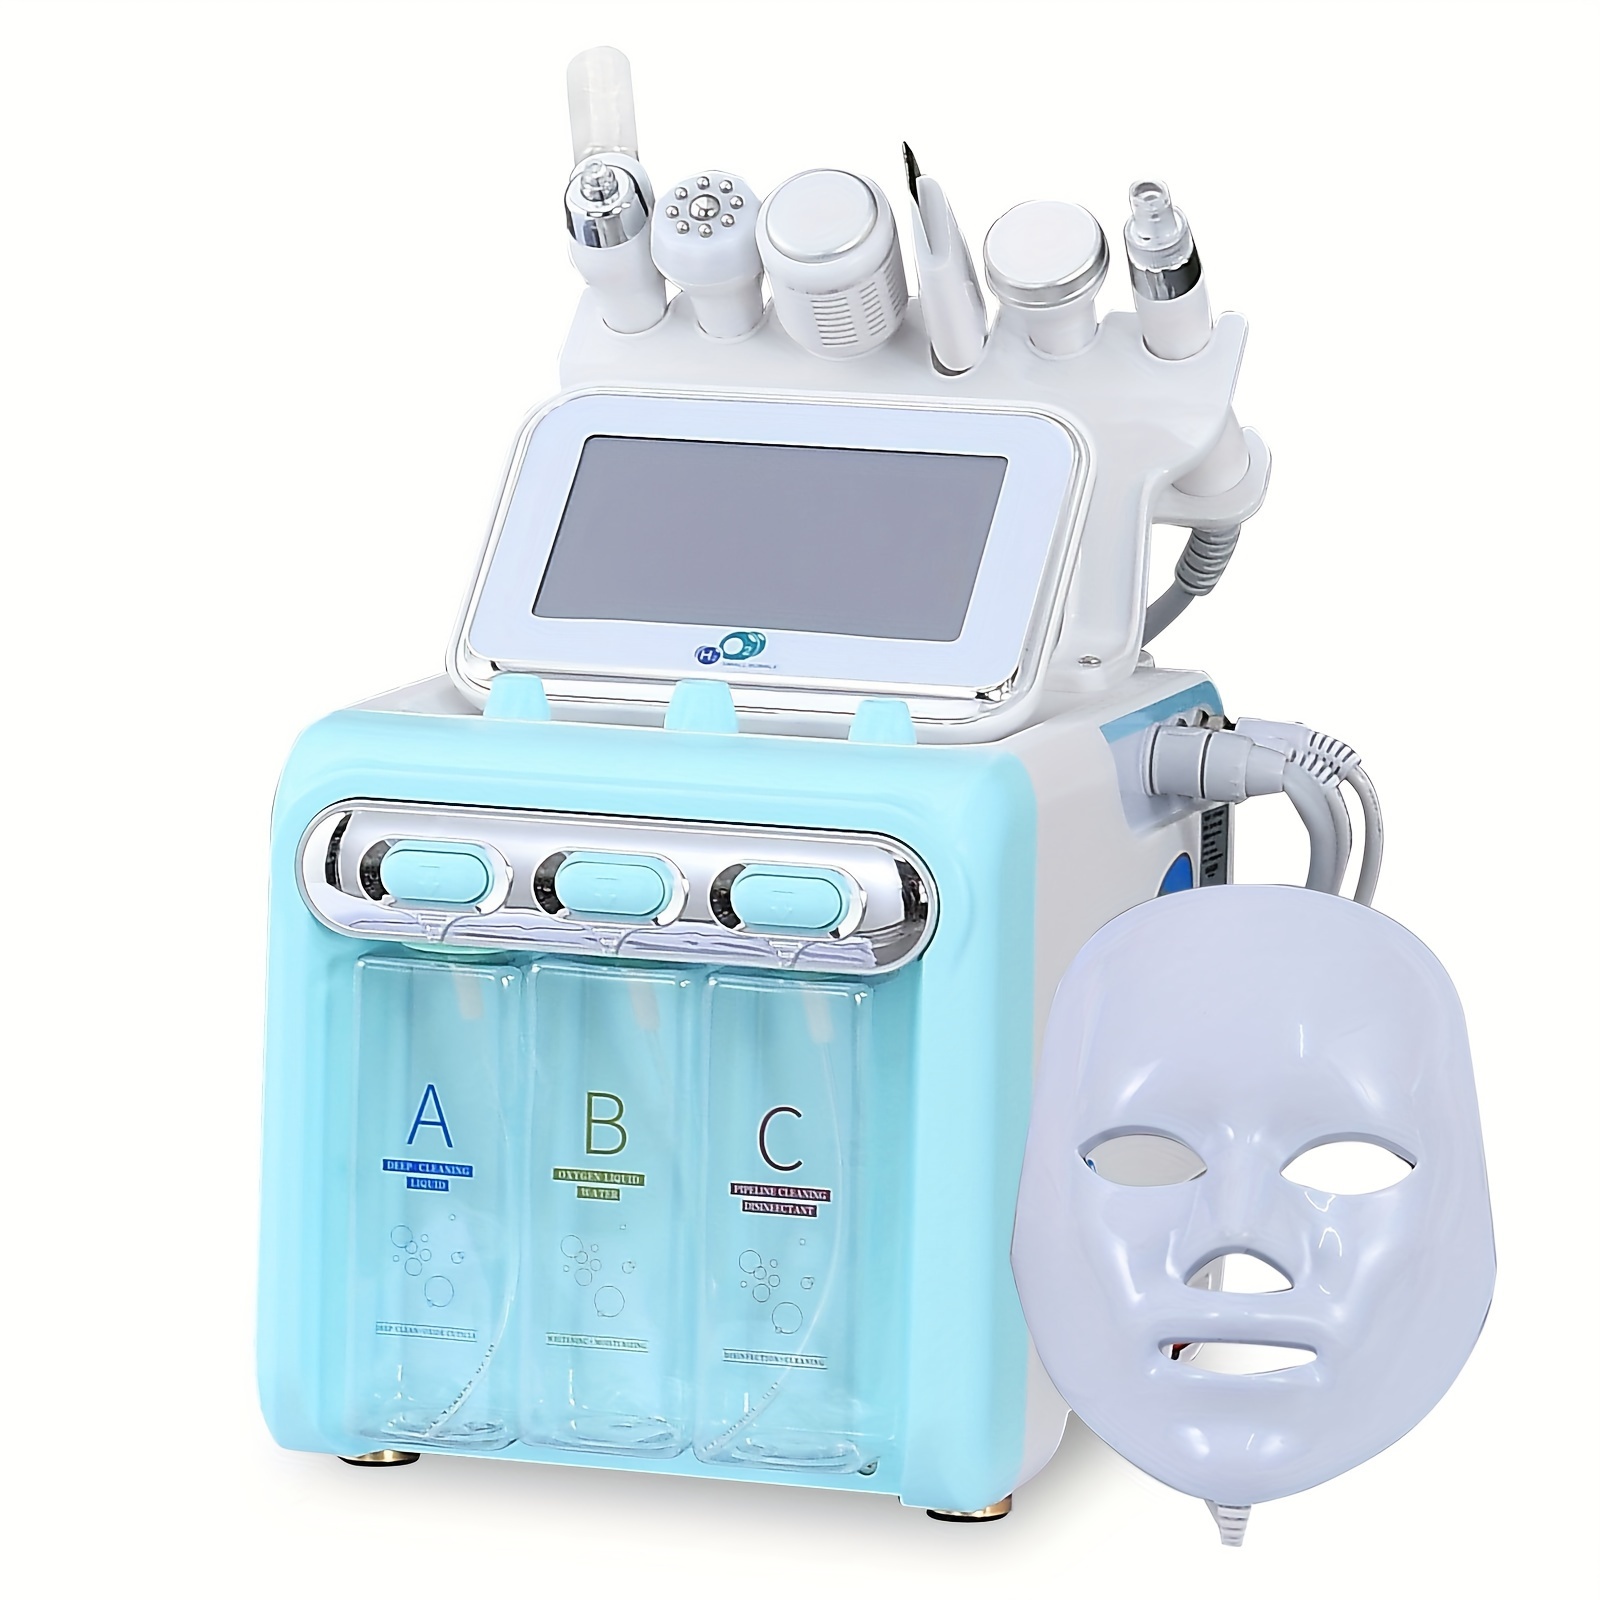 

7-in-1 H2o2 Beauty Skin Cleaning Hydrogen-oxygen Facial Machine, Facial Care Machine, Homeuse Beauty Instrument